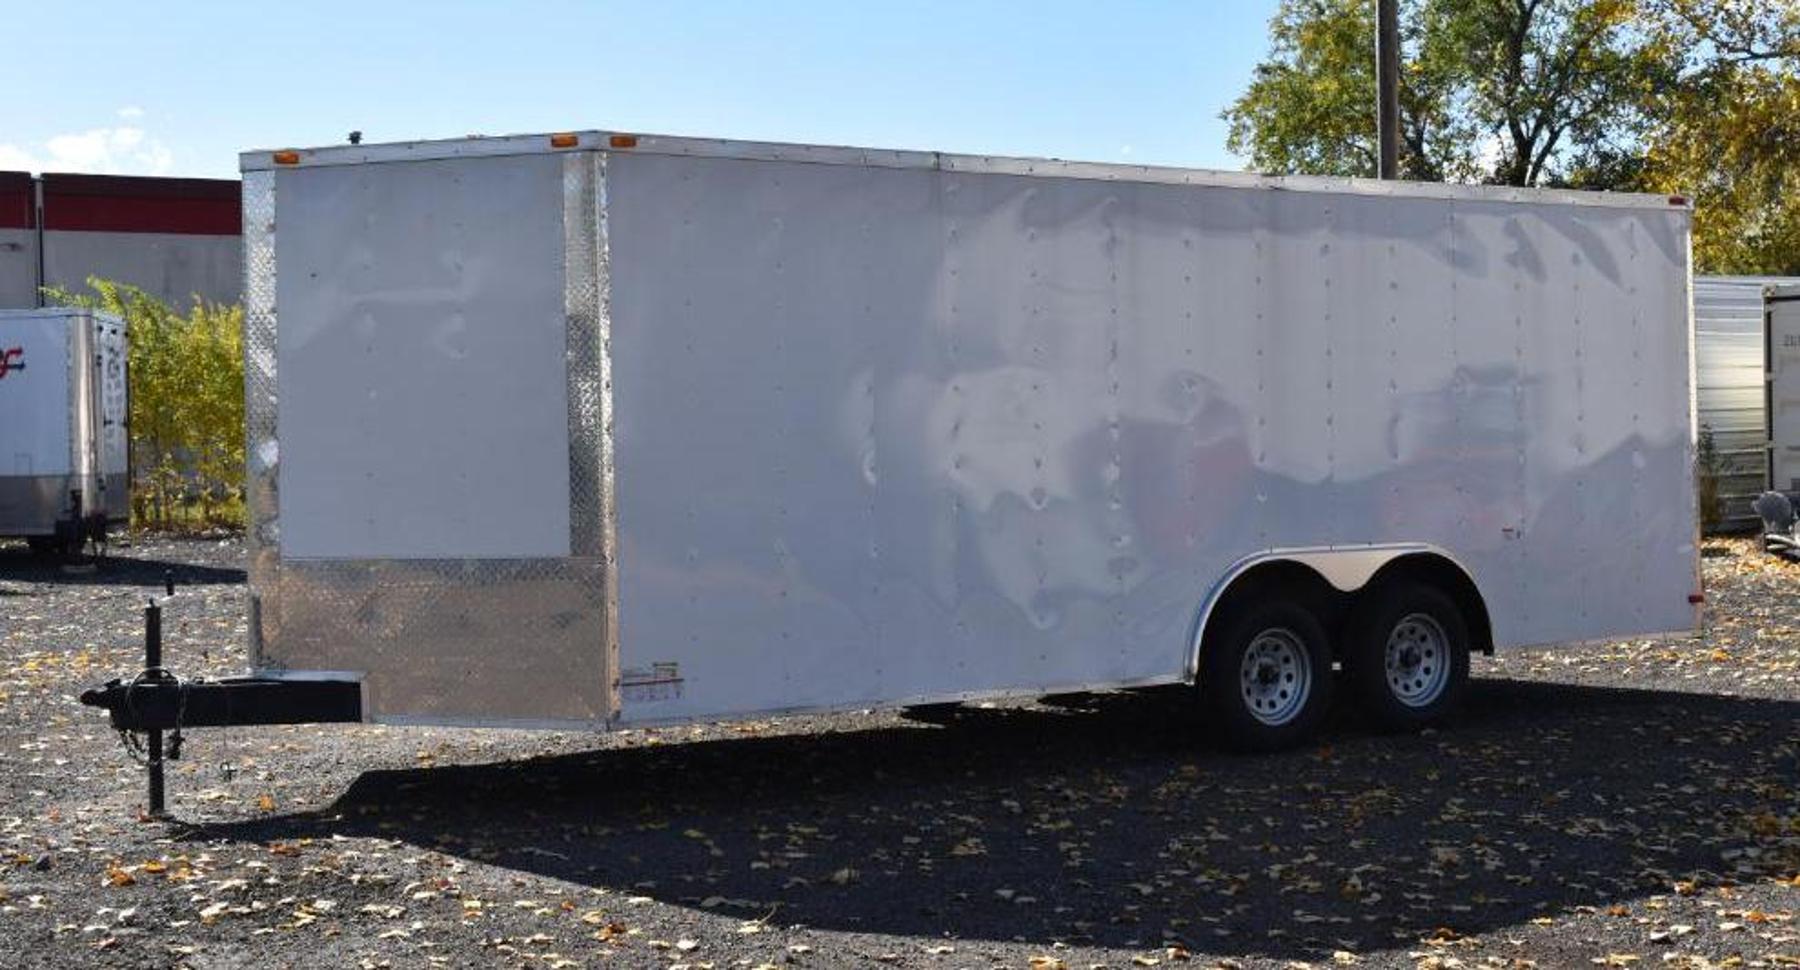 (2) Enclosed Trailers, 2005 Ford F-550, Attachments, Contracting Tools, & Shop Supplies